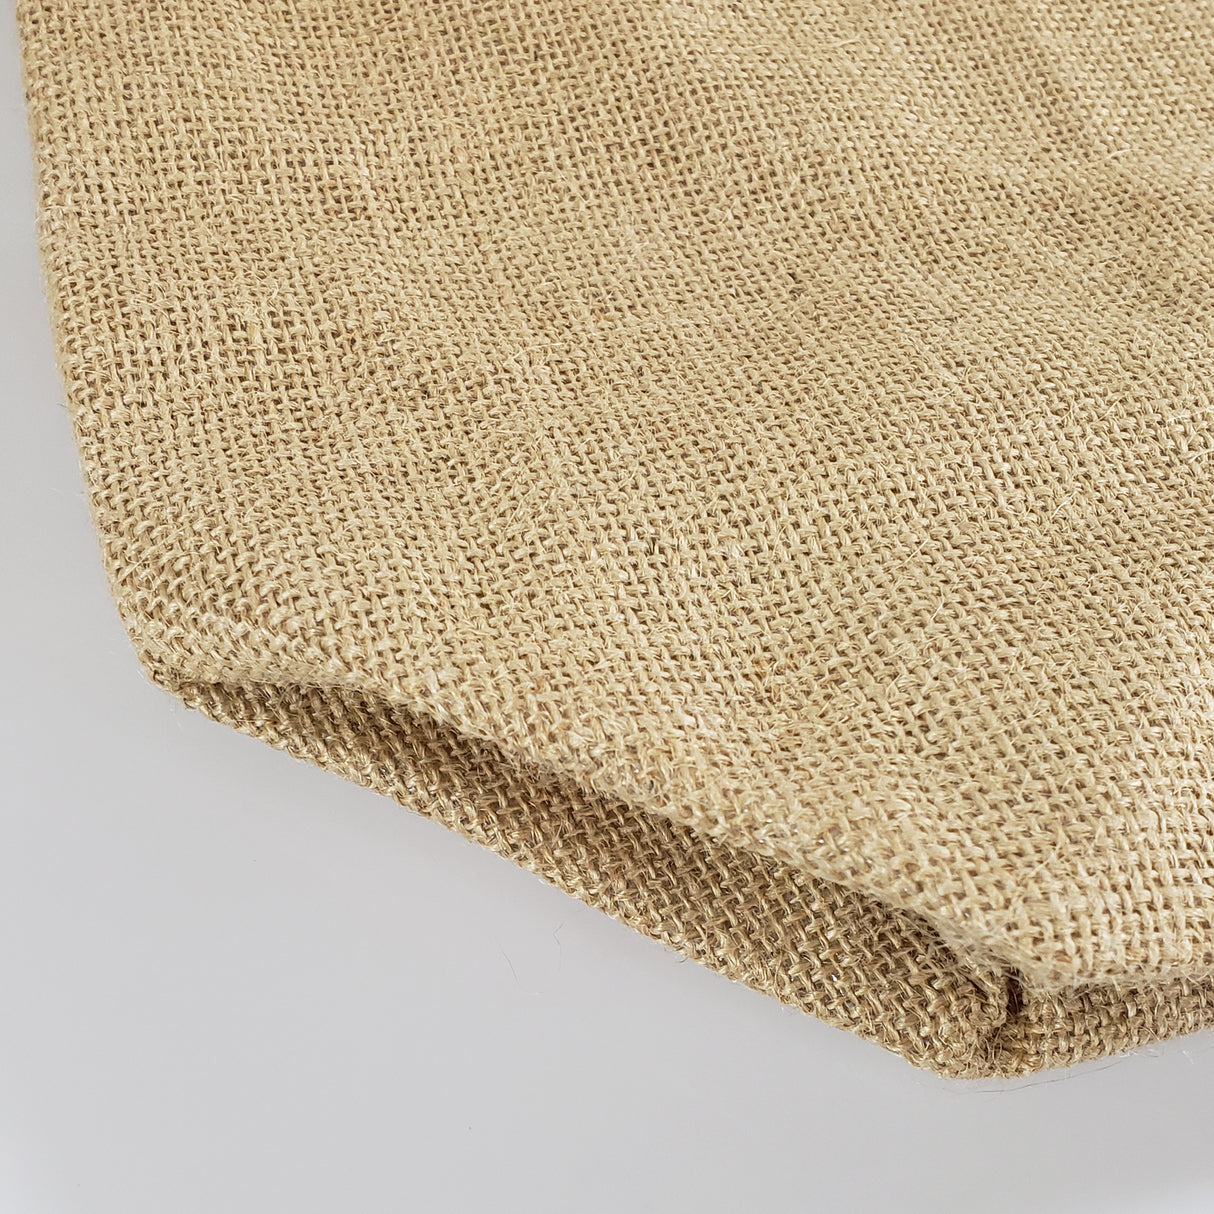 48 ct Everyday Jute Bags / Carry-All Burlap Totes - By Case